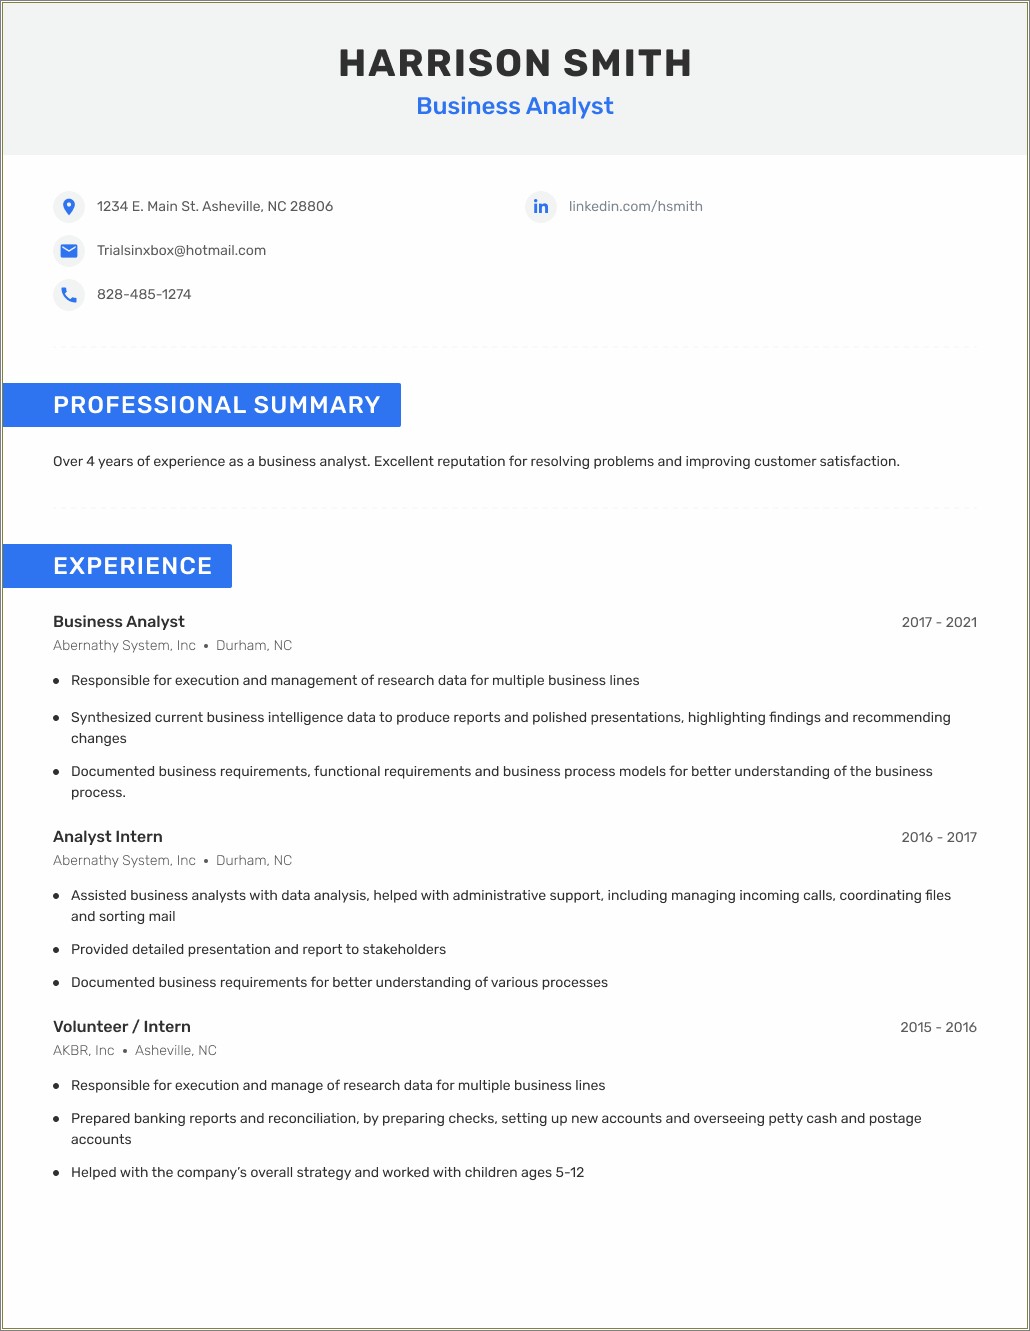 Sample Resume That Gets You Hired